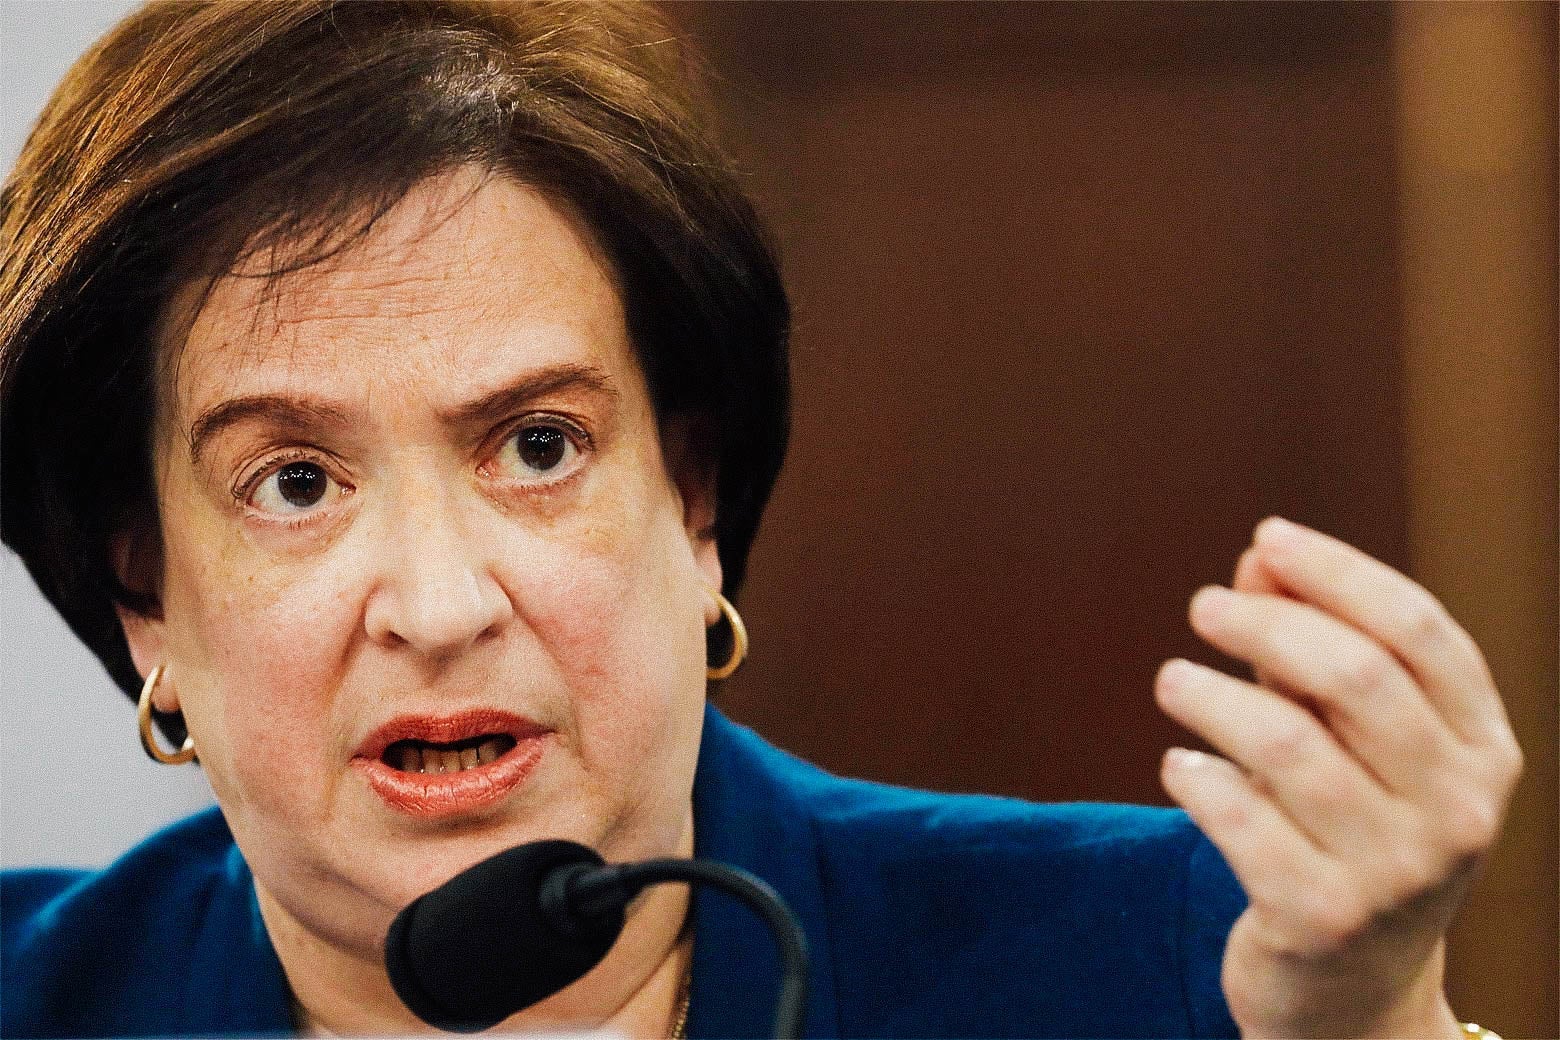 Elena Kagan speaks into a microphone and raises her hand.